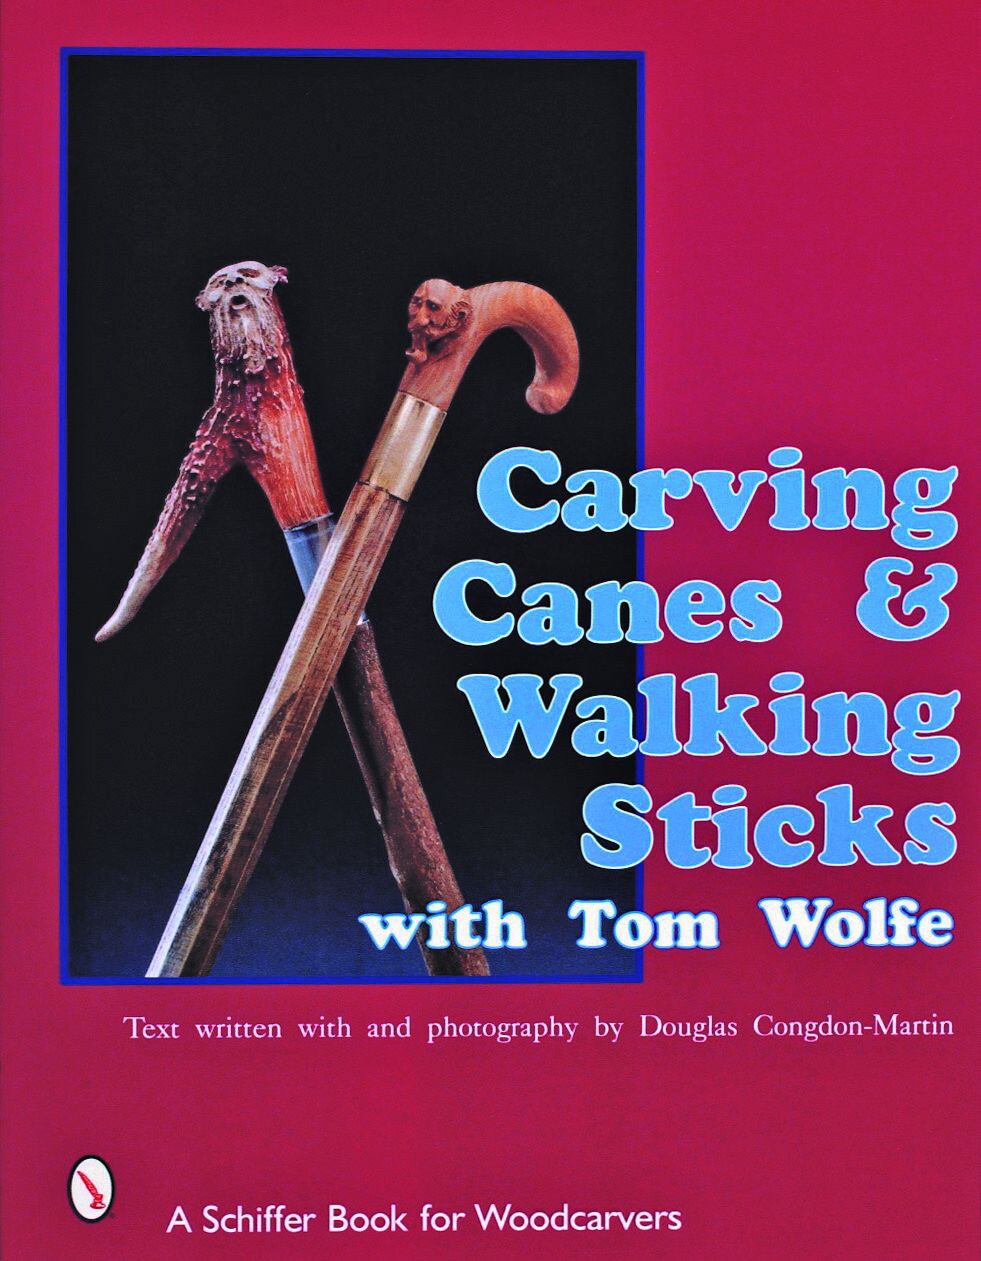 Carving Canes &#x26; Walking Sticks with Tom Wolfe